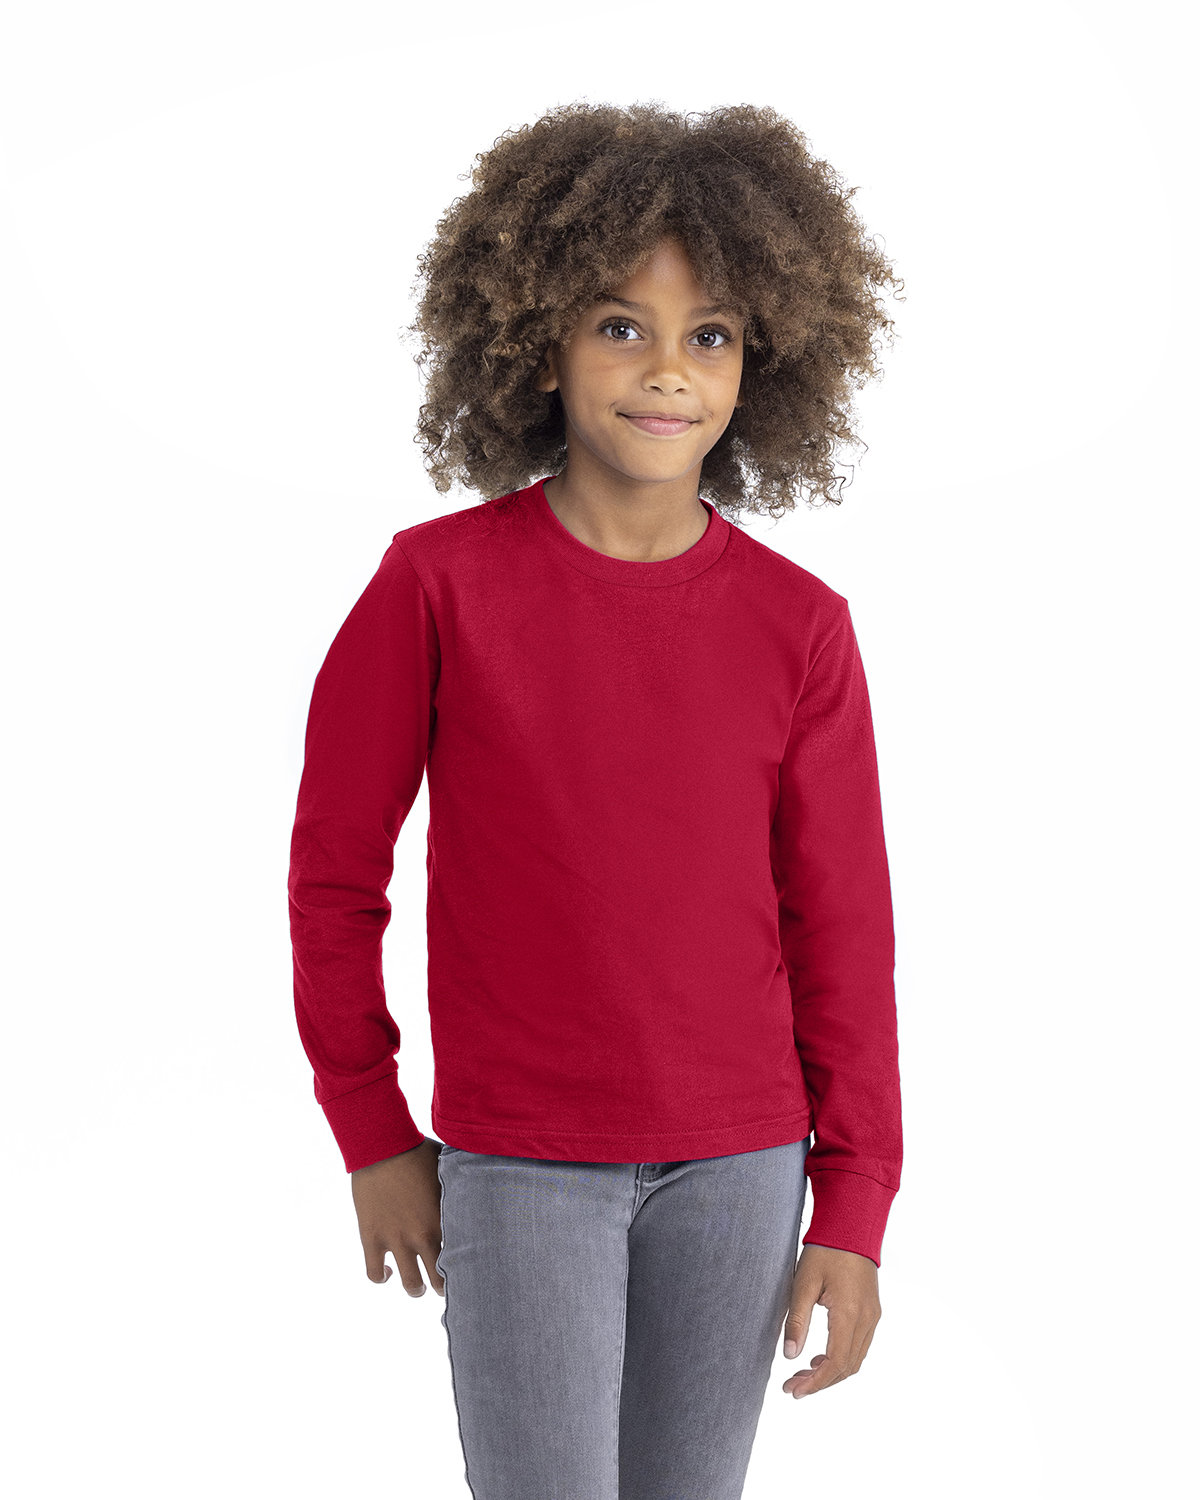 Next Level Apparel Youth Cotton Long Sleeve T-Shirt | alphabroder